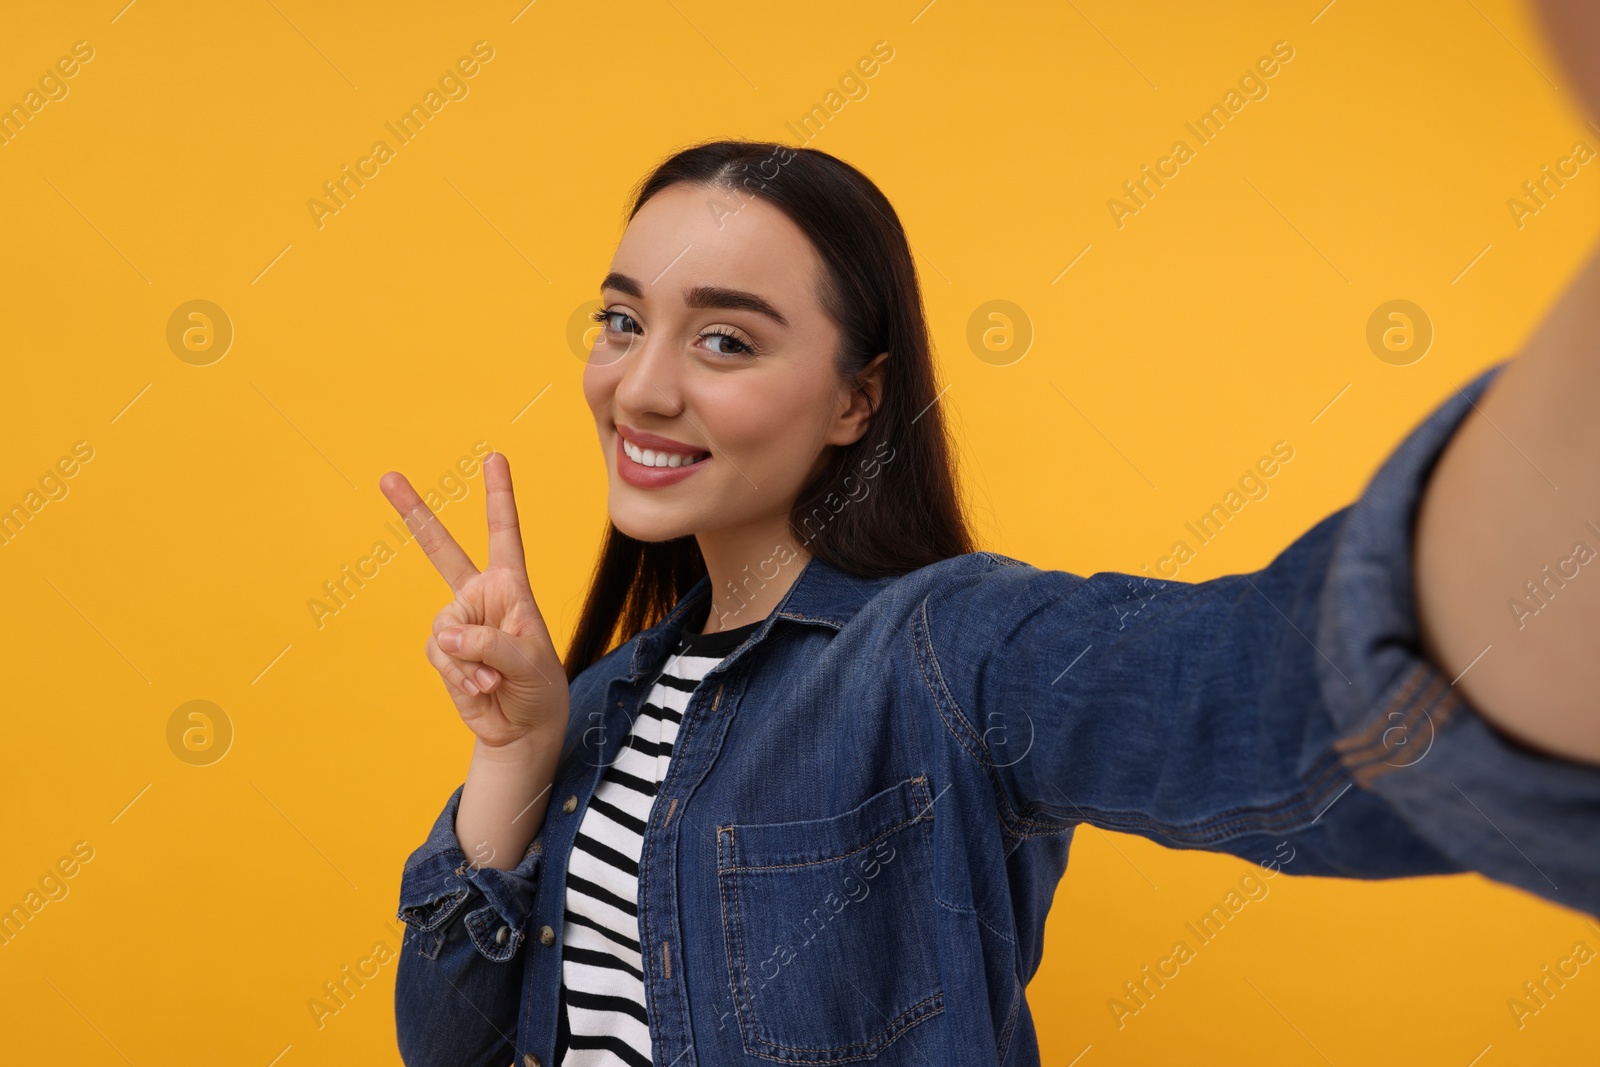 Photo of Smiling young woman taking selfie and showing peace sign on yellow background